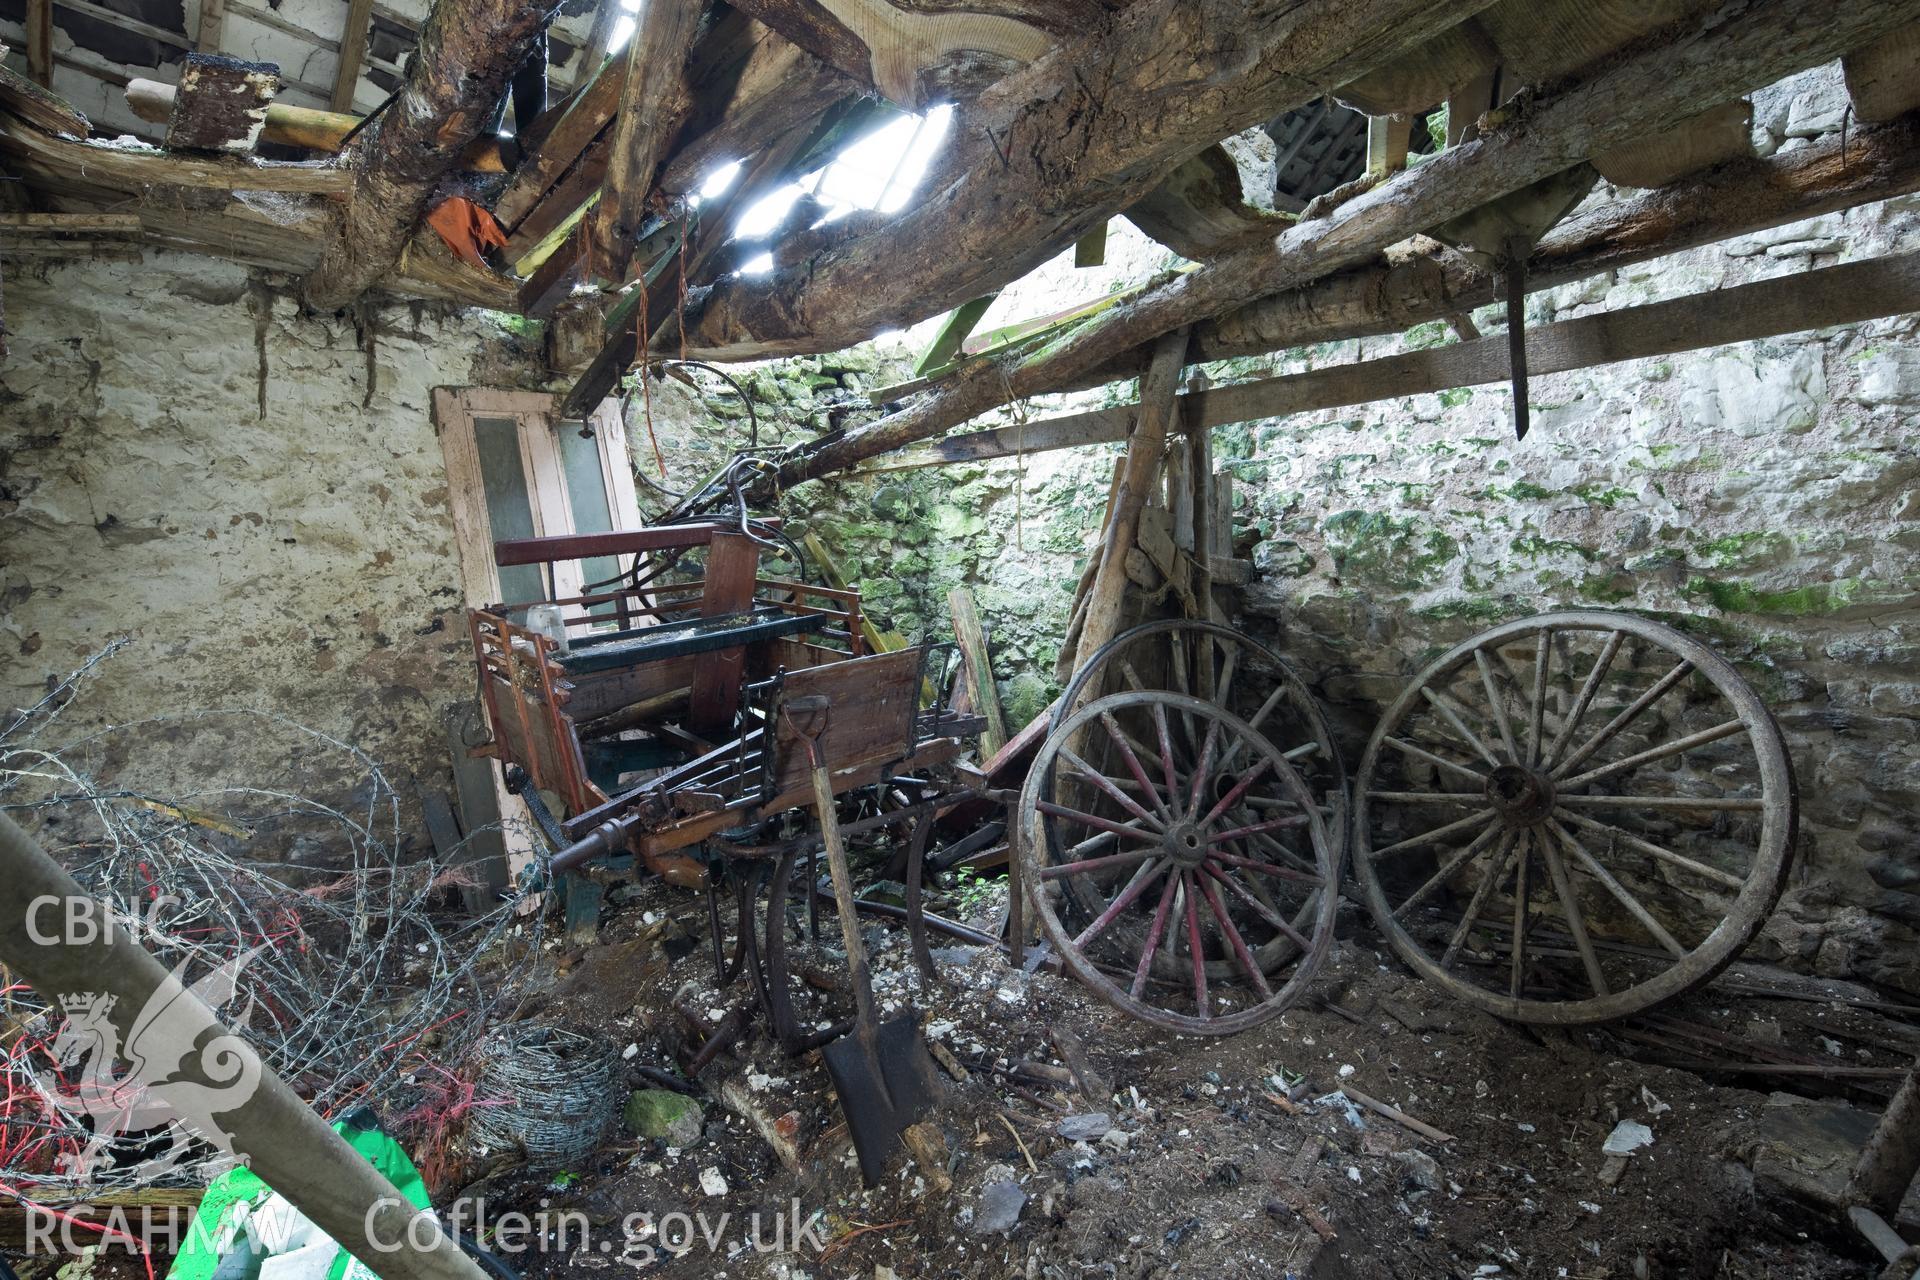 Interior with open carriage and cart wheels.